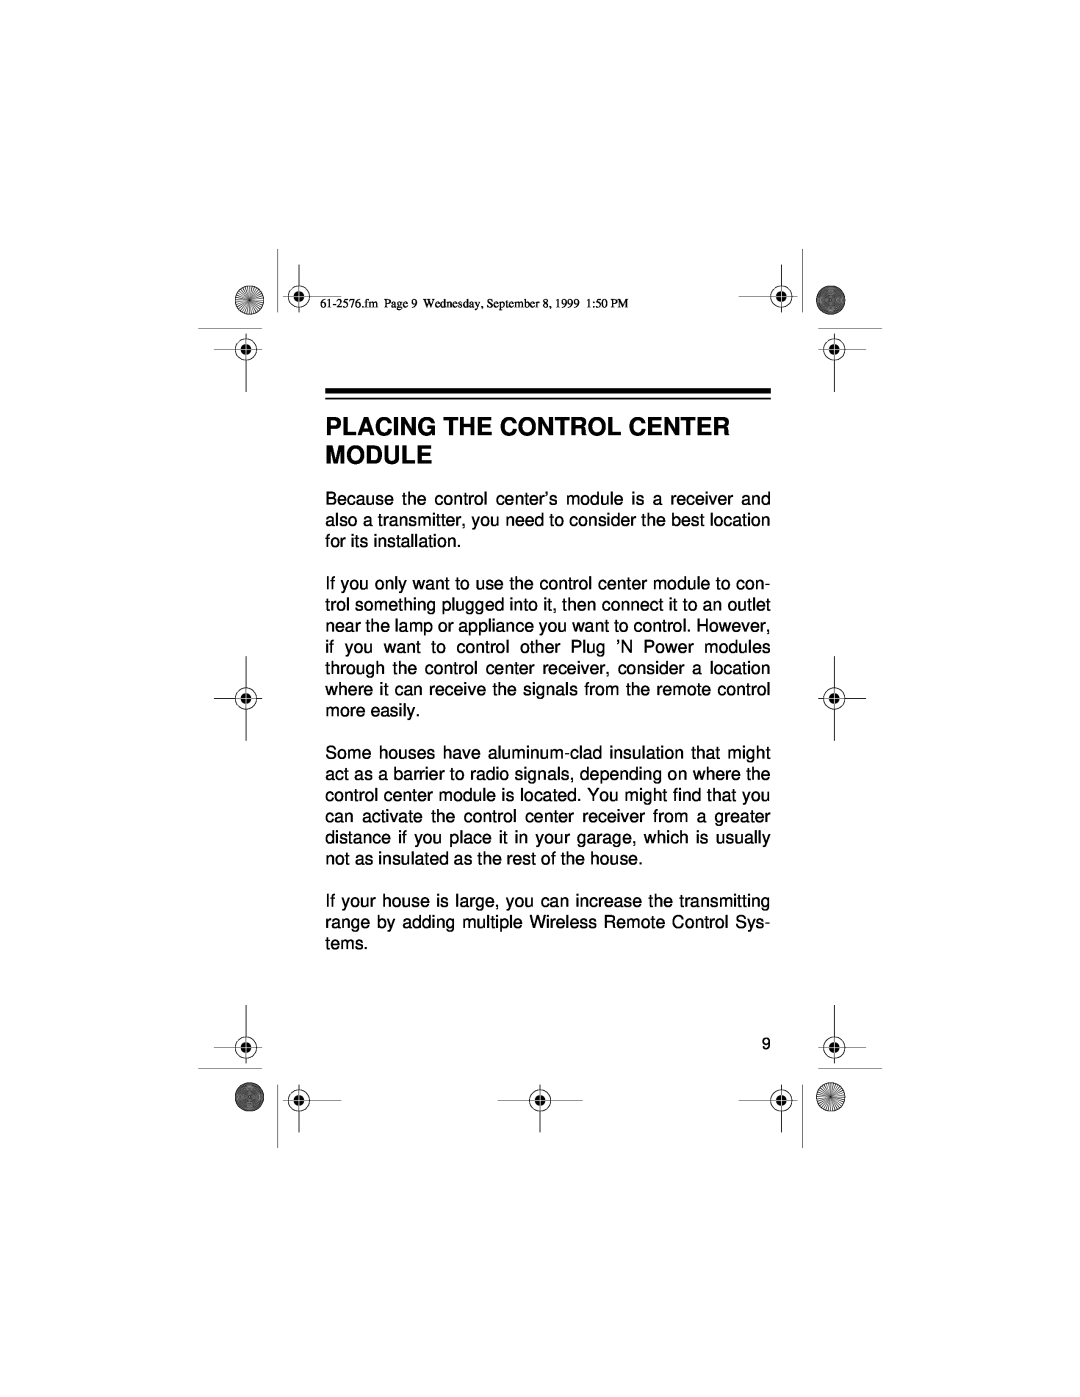 Radio Shack Wireless Remote Control System owner manual Placing The Control Center Module 